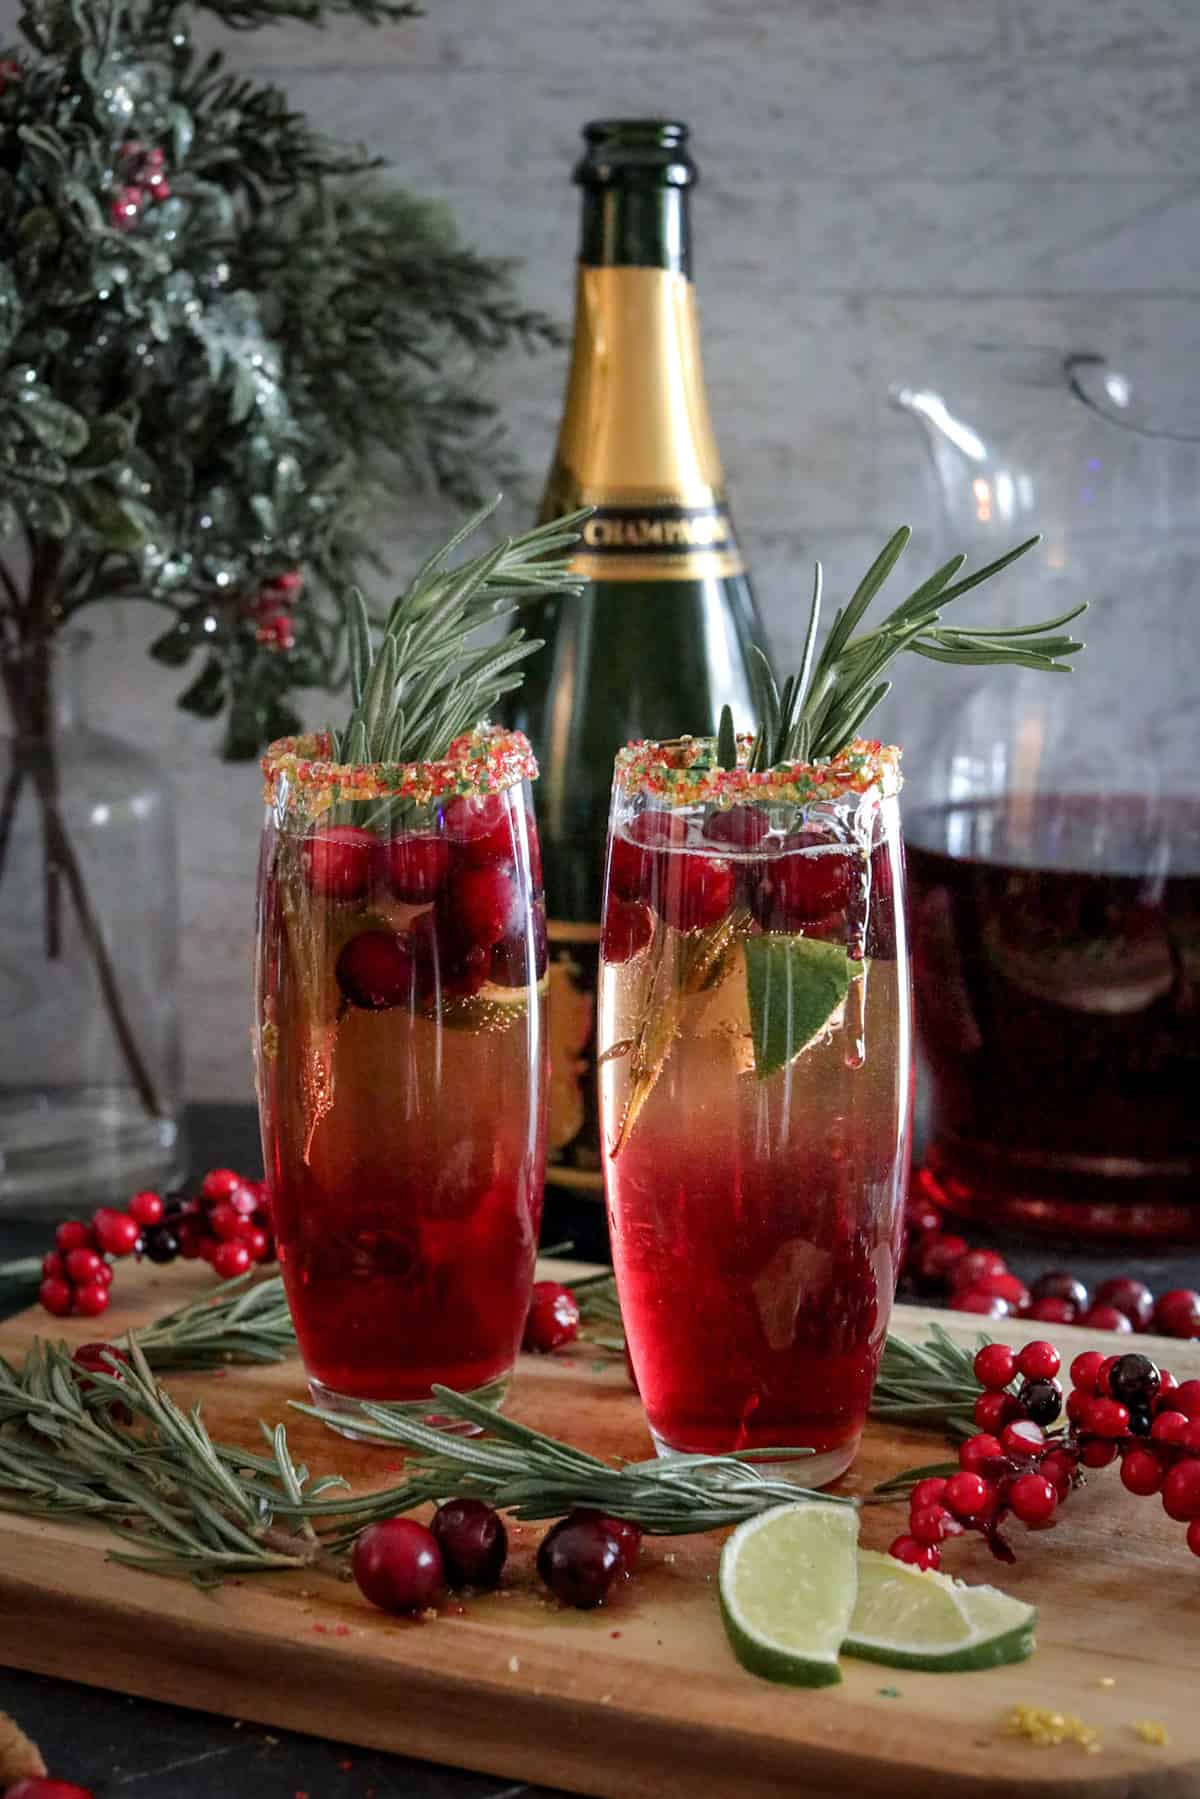 Cranberry mimosa cocktails on a wood cutting board with fresh cranberries, limes, and rosemary.